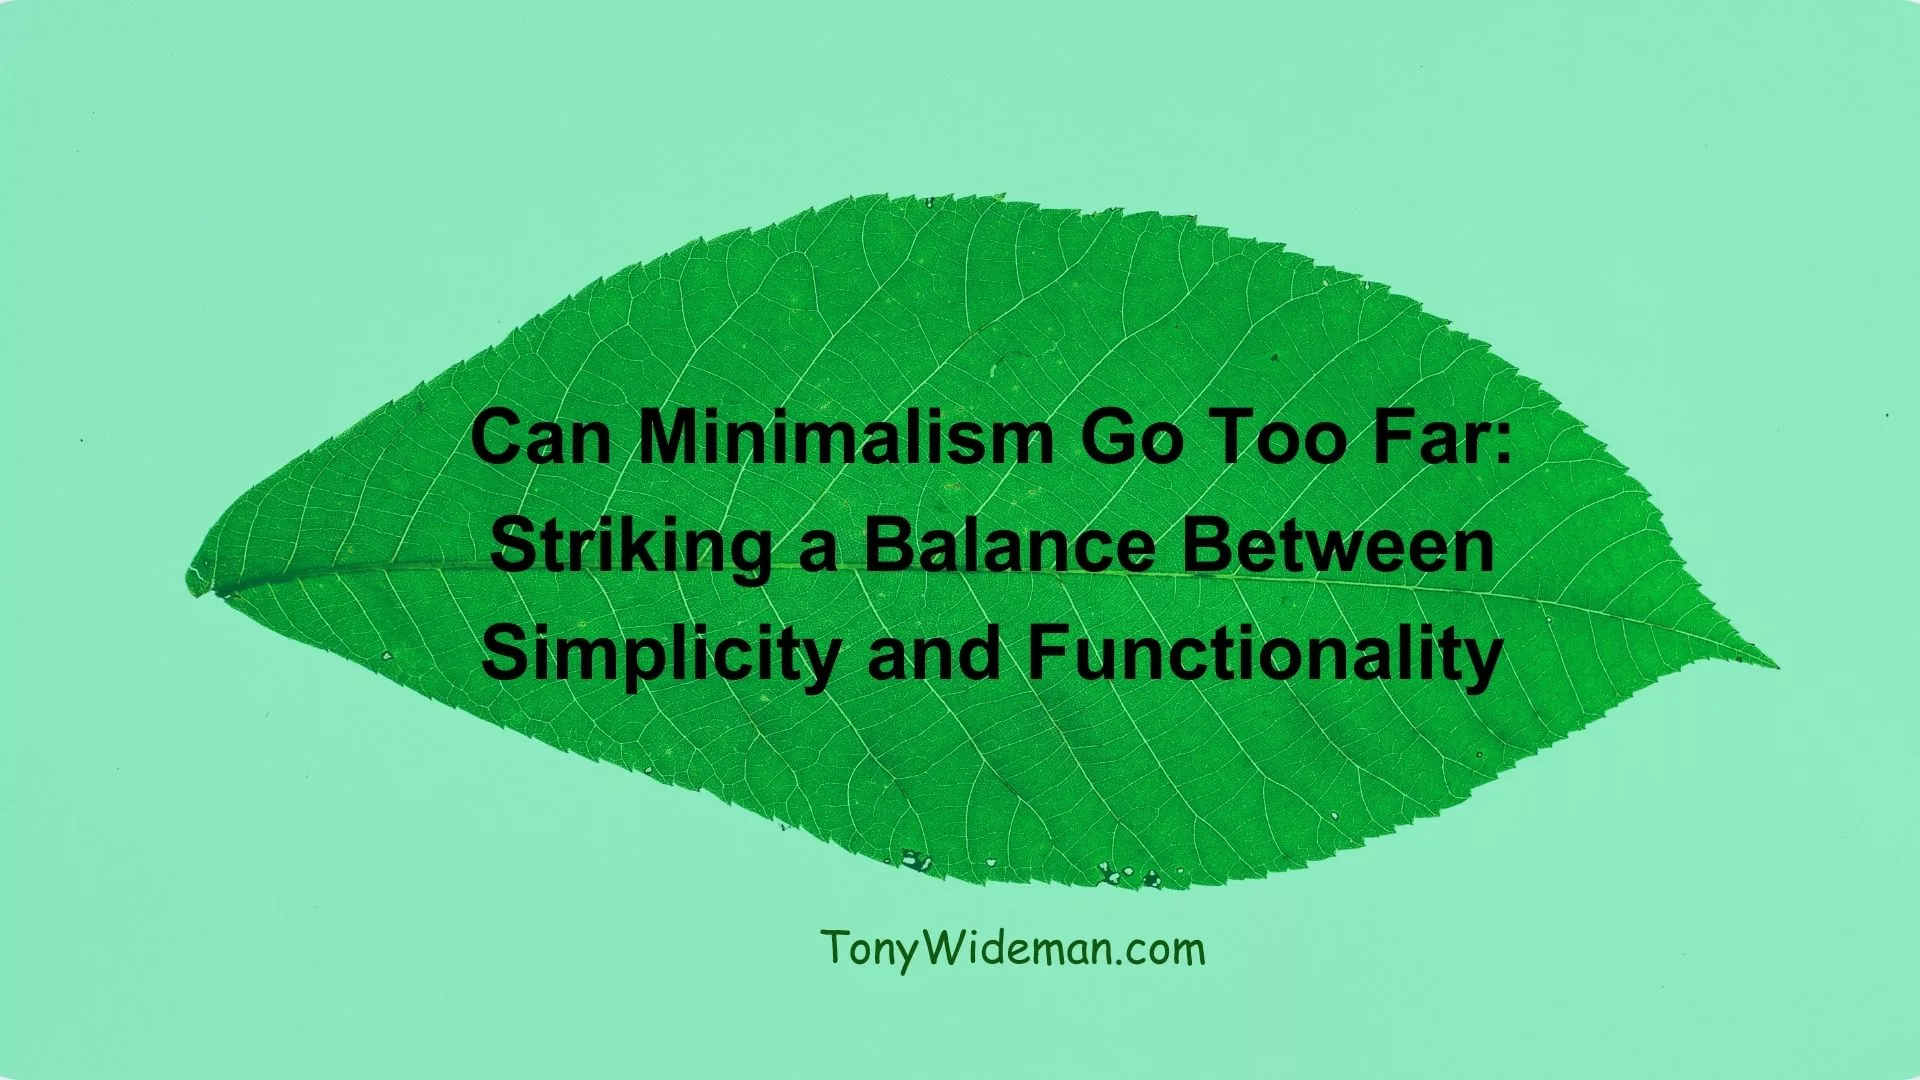 Can Minimalism Go Too Far To Be Beneficial?